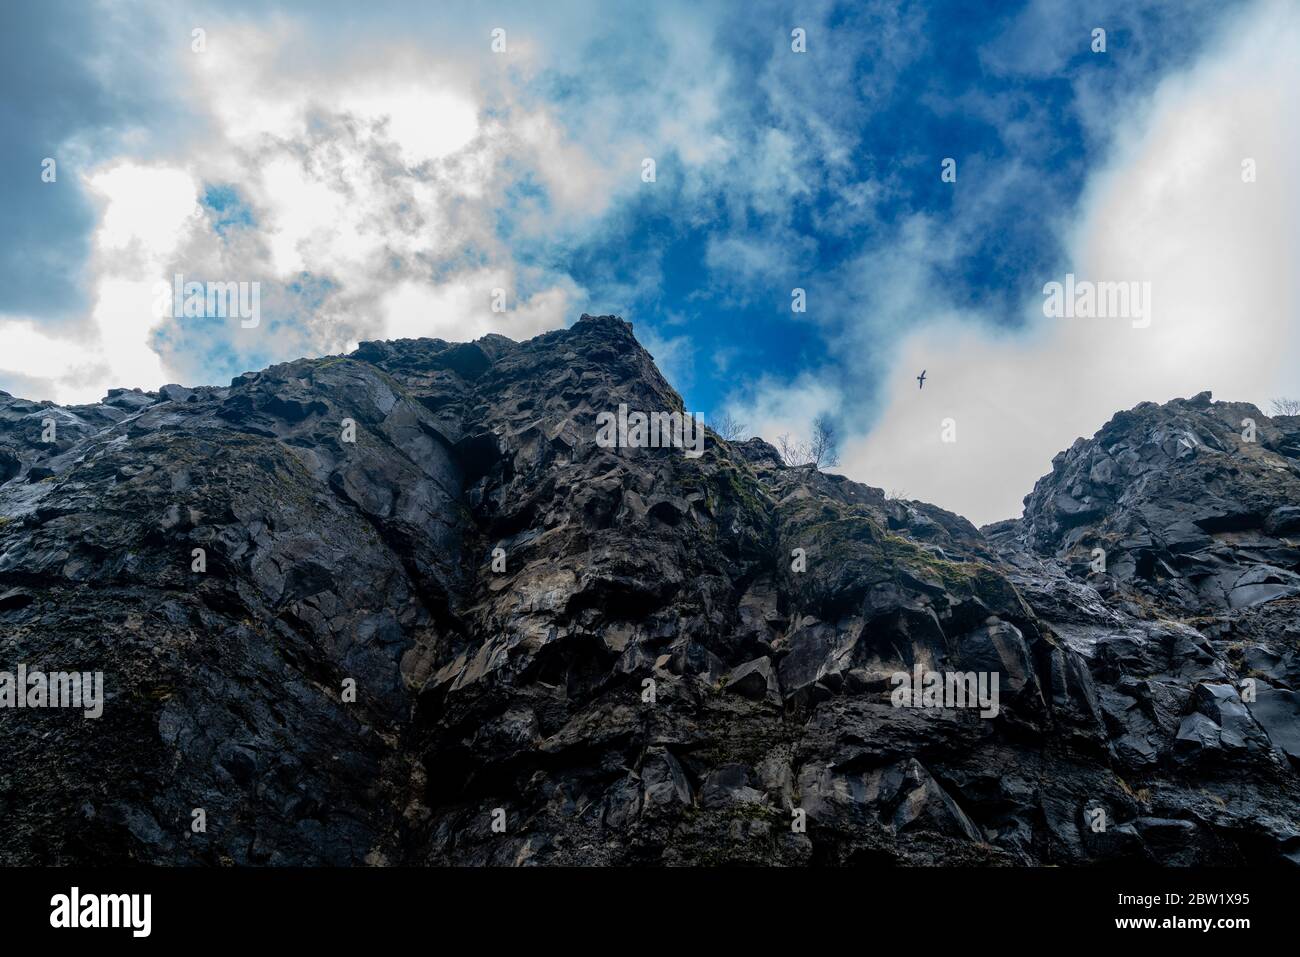 Ground view of a steep and rocky cliffside under a blue cloudy sky with a lonely bird flying Stock Photo